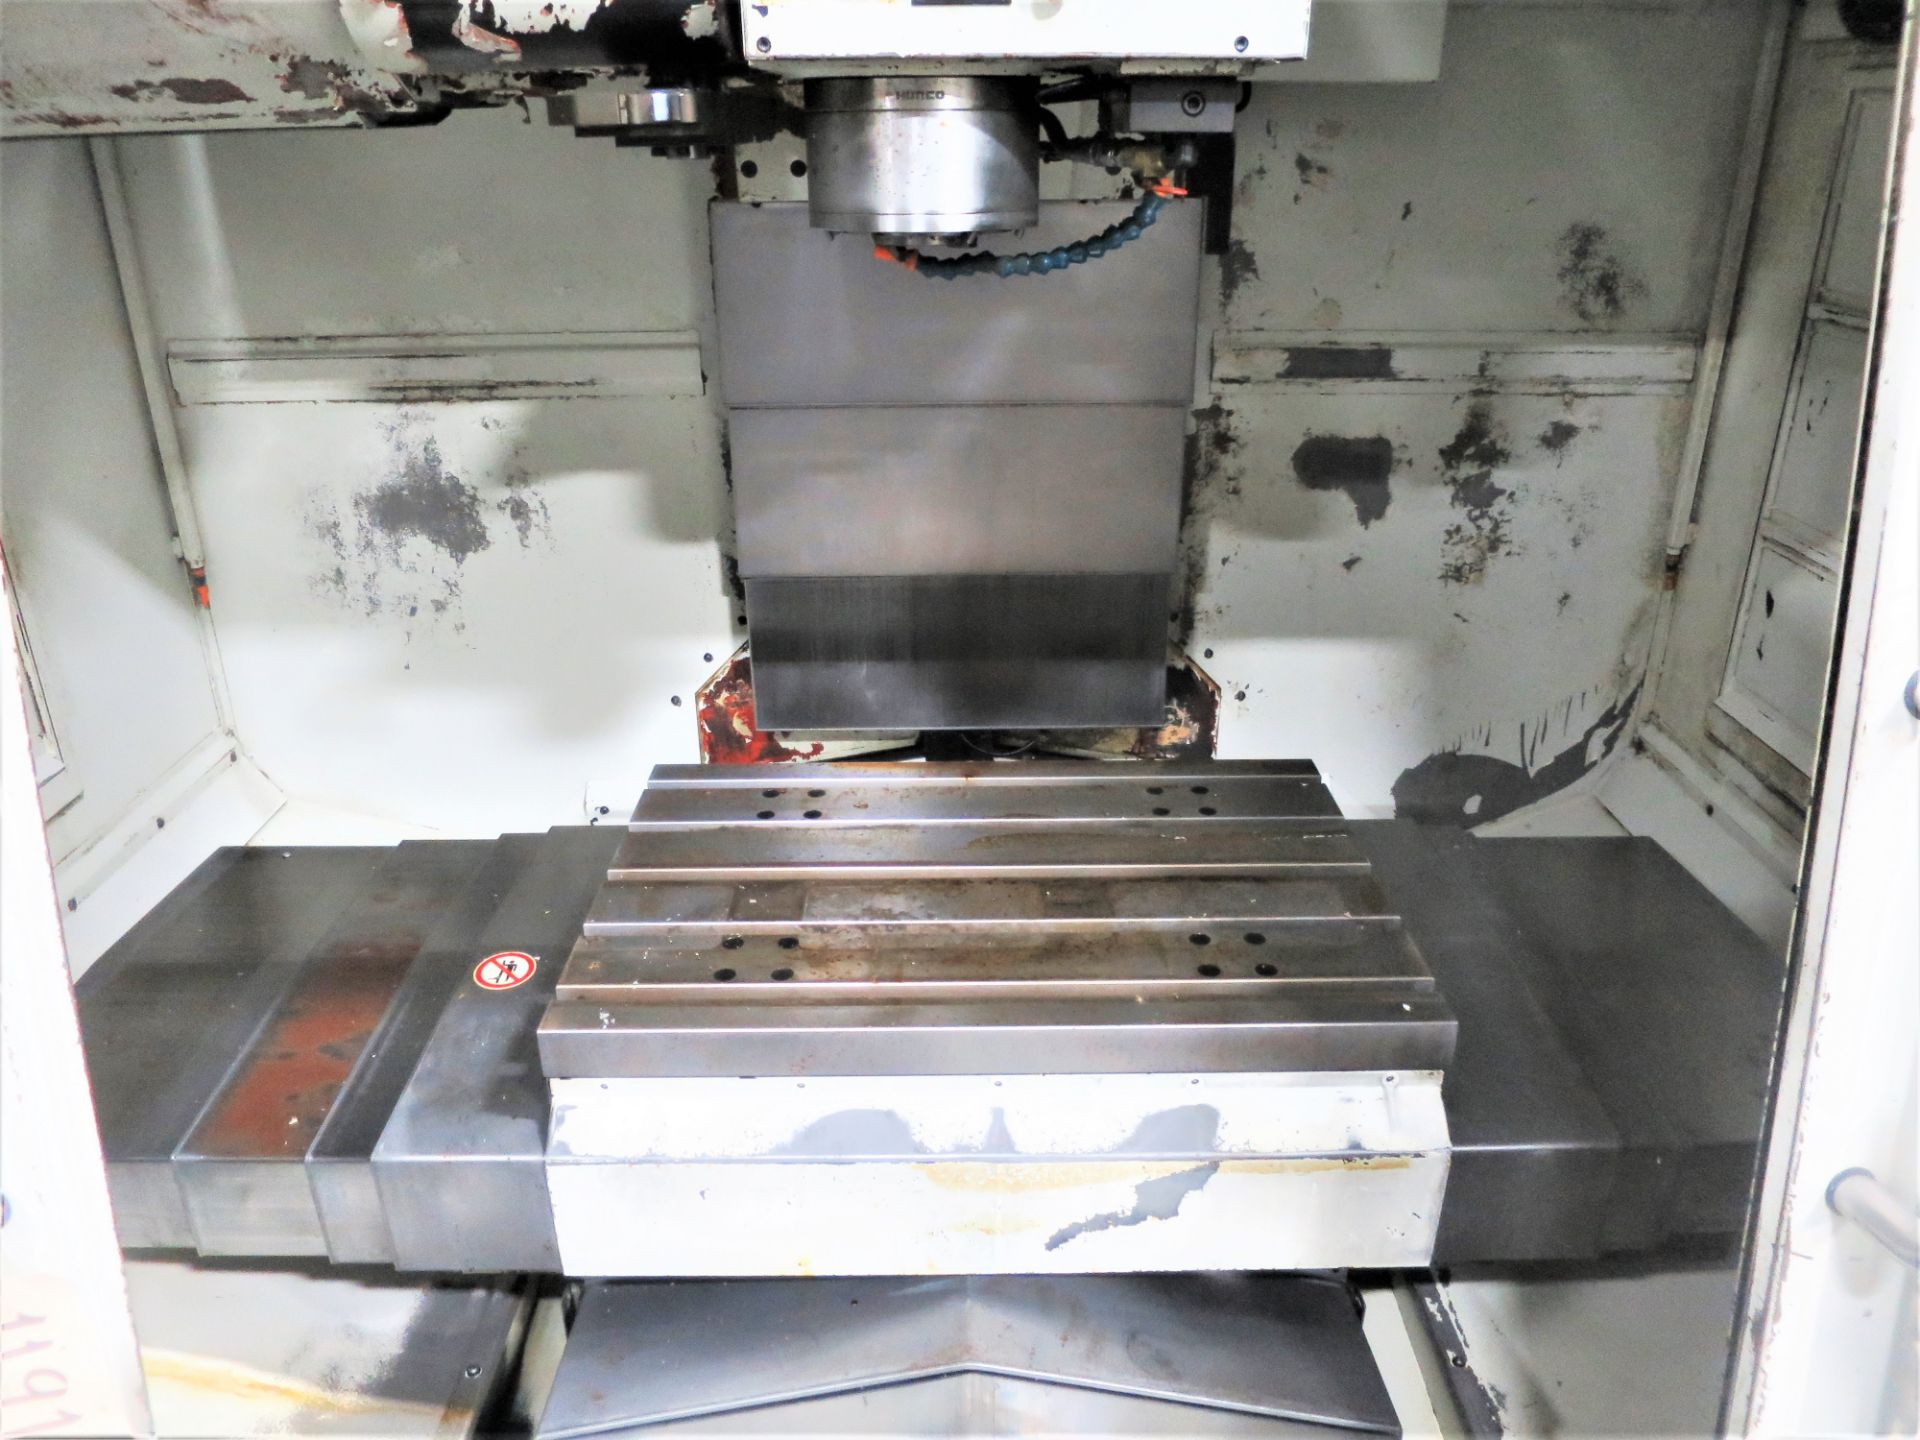 Hurco VMX-24 3-Axis CNC Vertical Machining Center, S/N M242-06019, New 2007 - Image 3 of 7